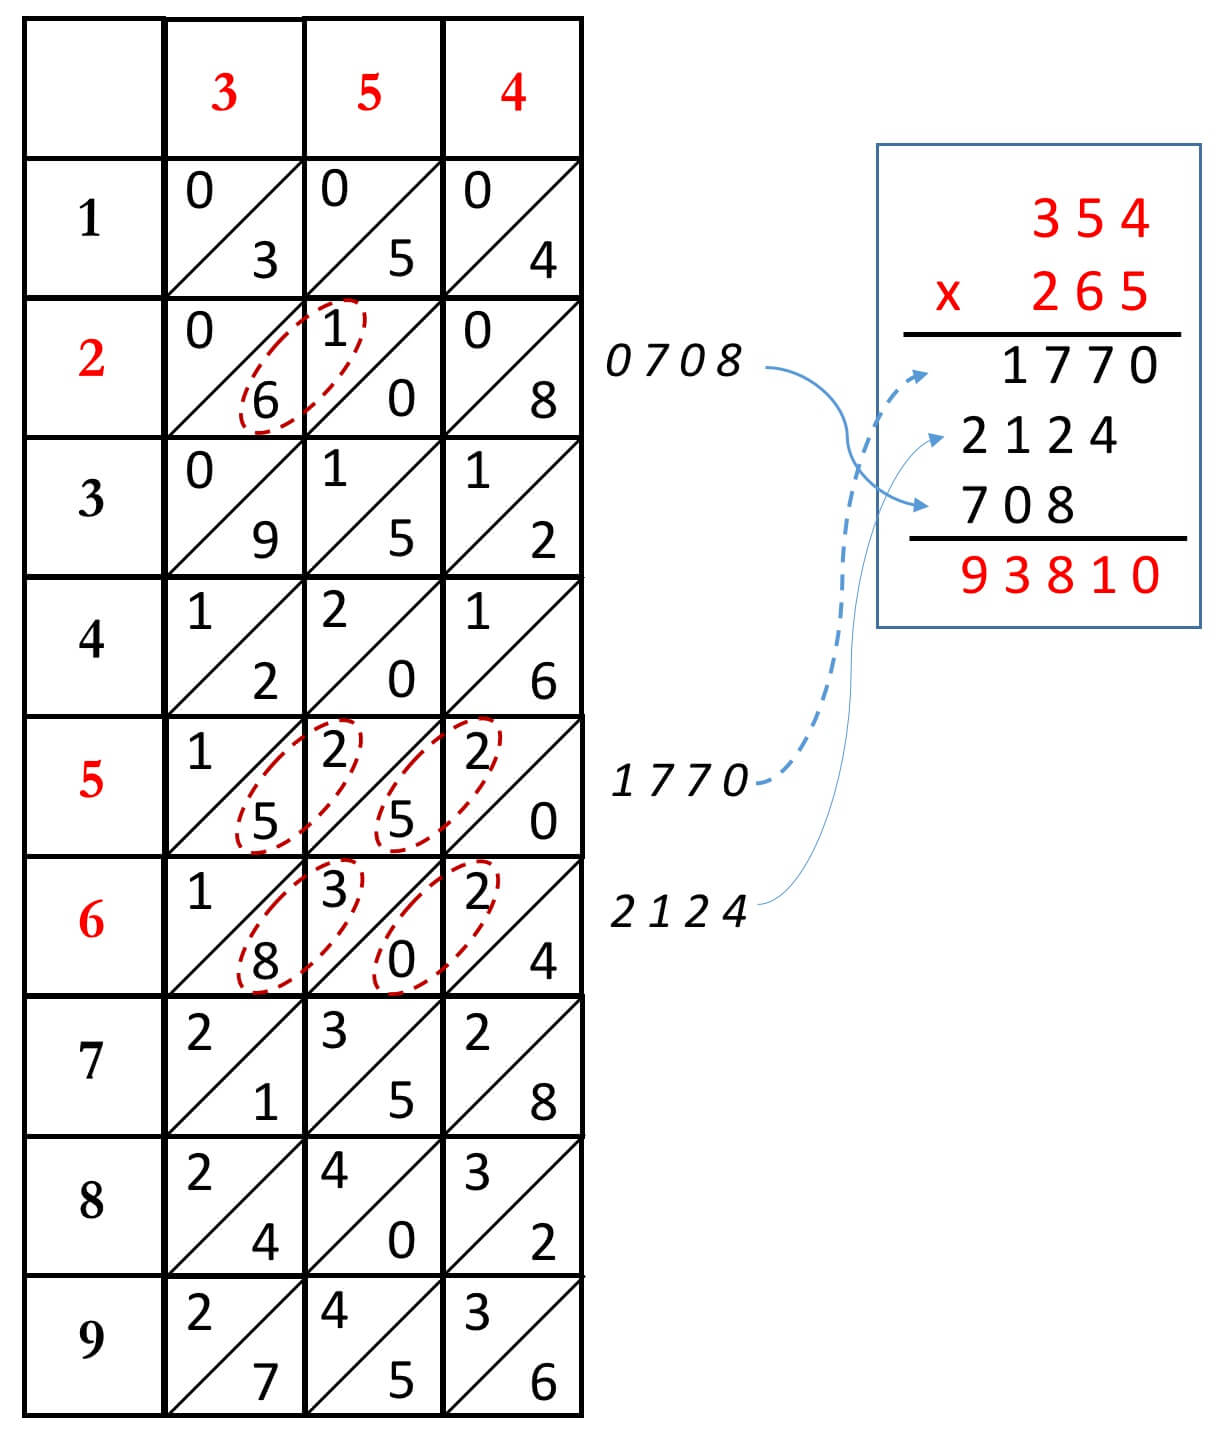 simplifying-calculations-from-the-multiplication-table-to-napier-s-bones-and-logarithms-kass